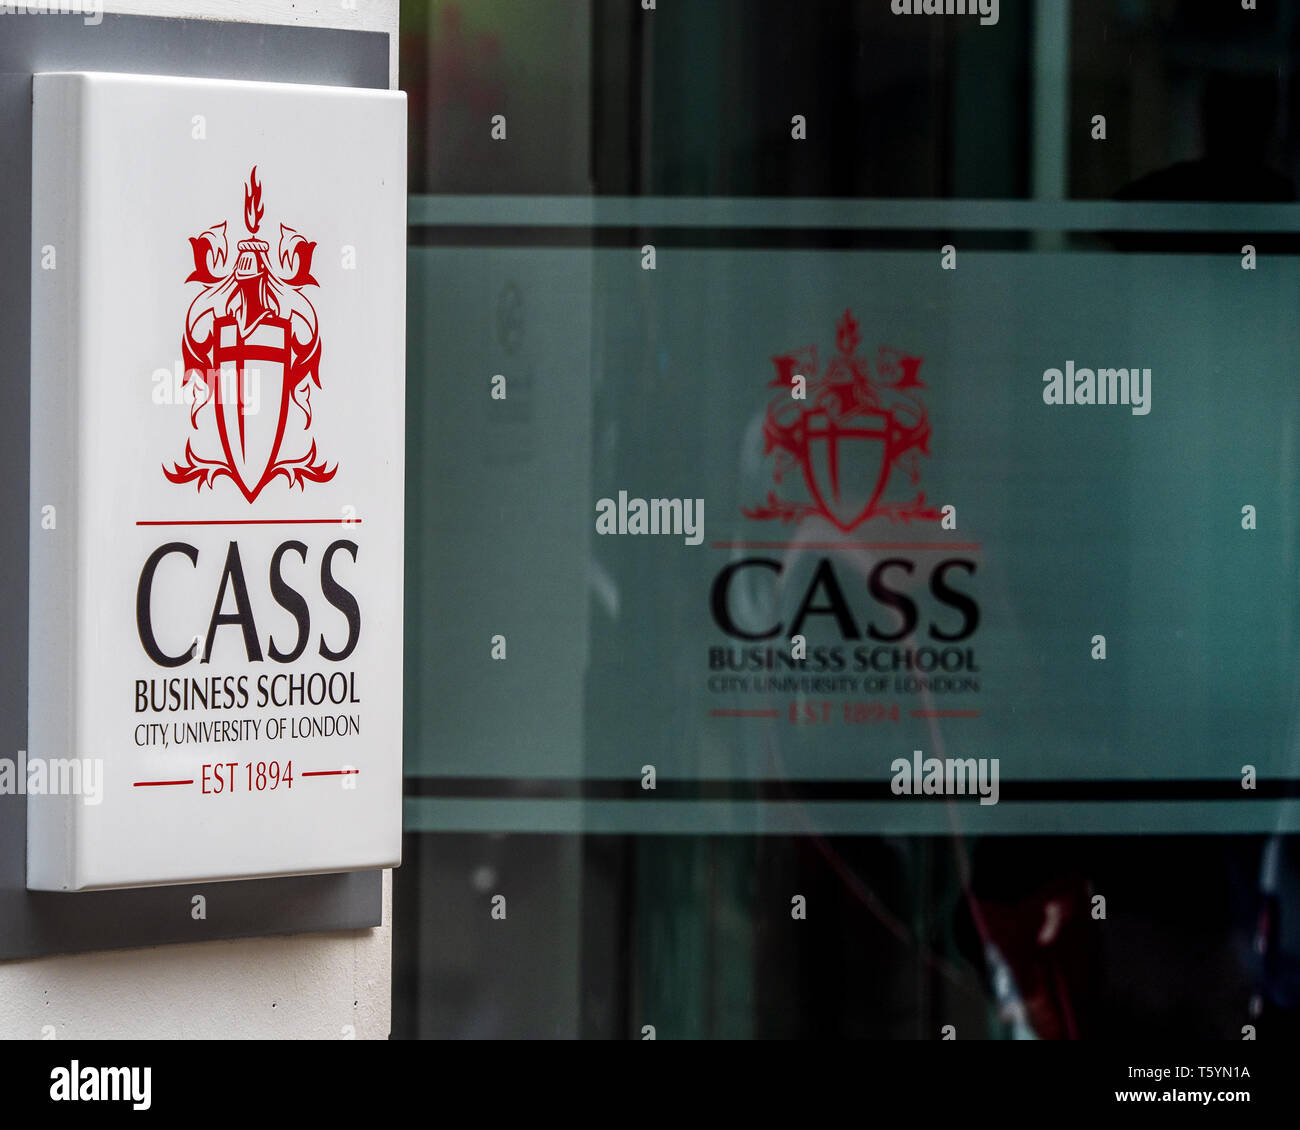 The Cass Business School, part of City University of London, in Bunhill Row, central London, UK. City University of London Cass Business School. Stock Photo